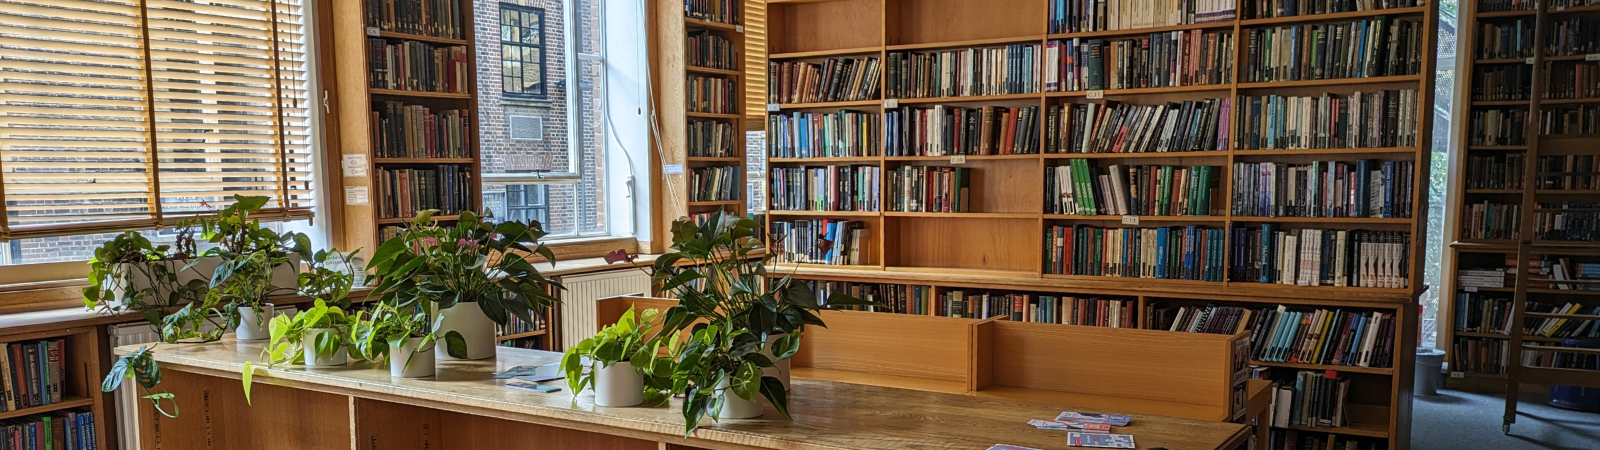 The Psychology Library space with wooden bookshelves, desks and potted plants.